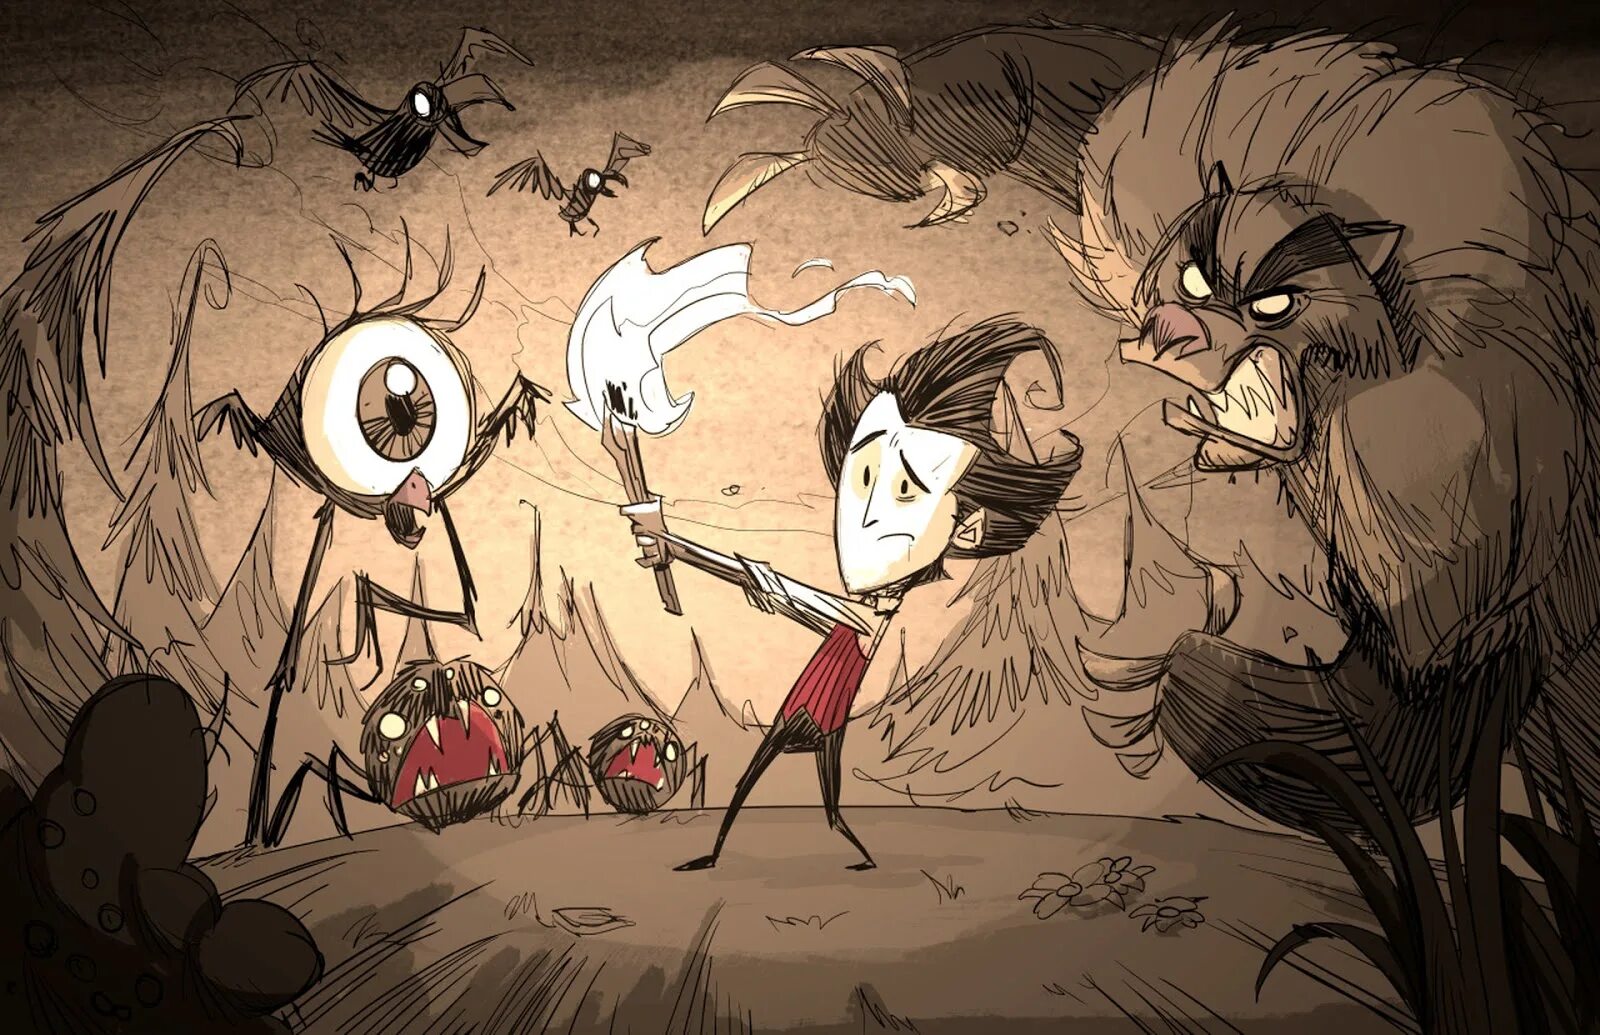 Don t starve starving games. Уилсон don't Starve Art. Don't Starve together Уилсон Art. Неголодайка Уилсон. Уилсон don't Starve концепт.